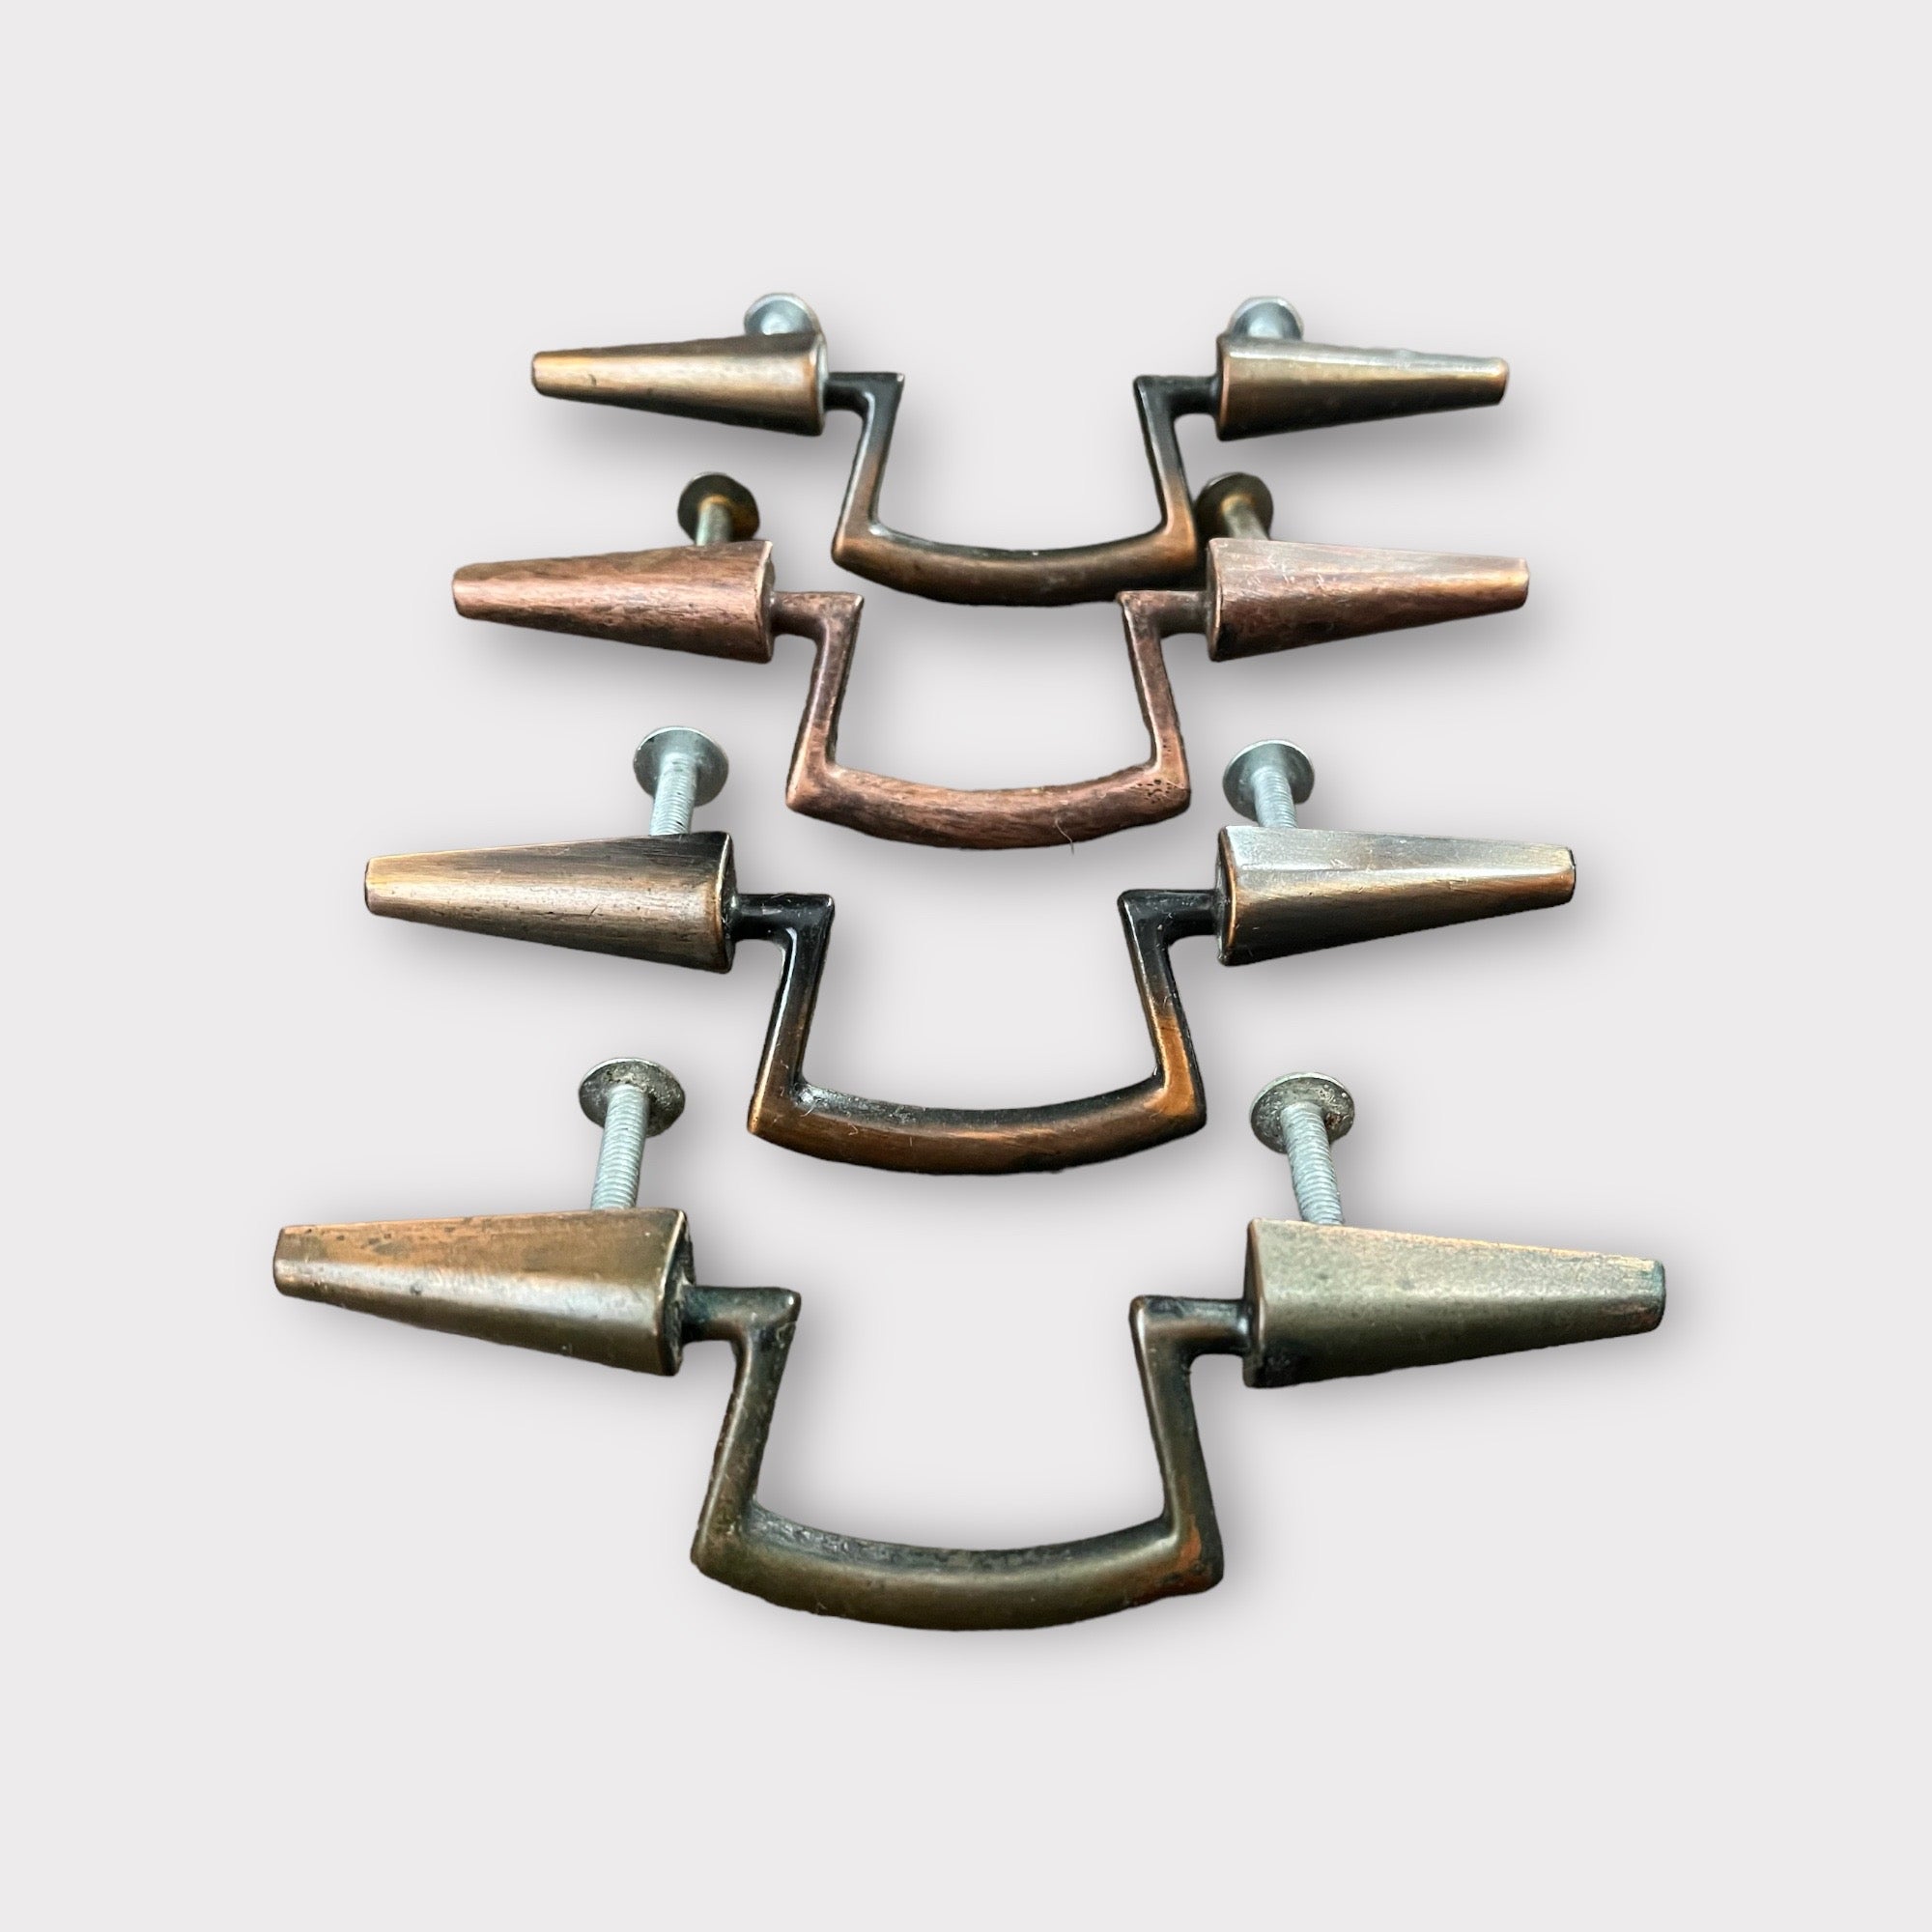 12 Mid-Century Drawer Pulls With Copper Finish